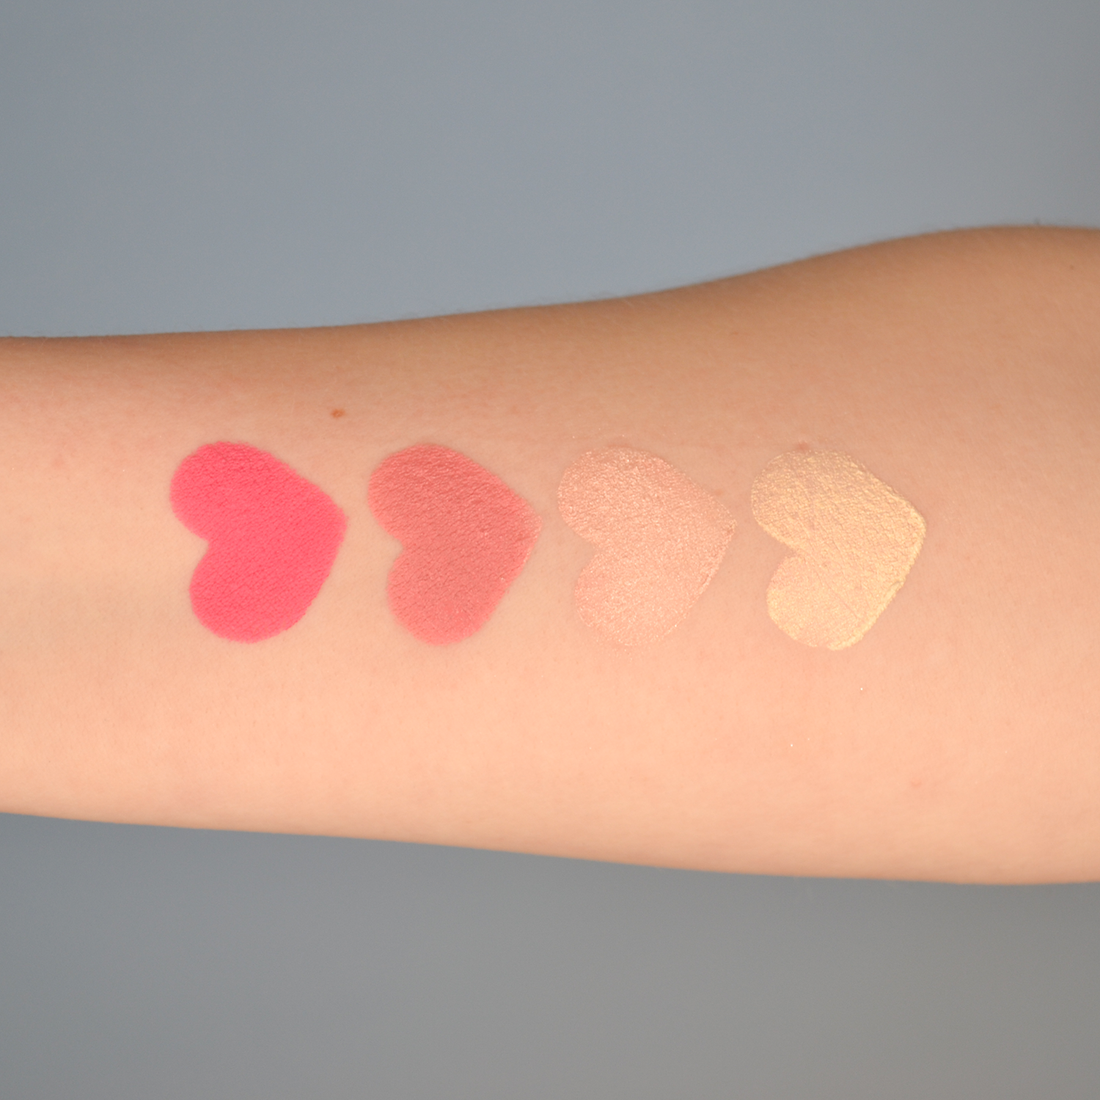 Swatches of shades Protagonist Pink, Positive Peony, Ethereal and Celestial in heart shapes on fair skin